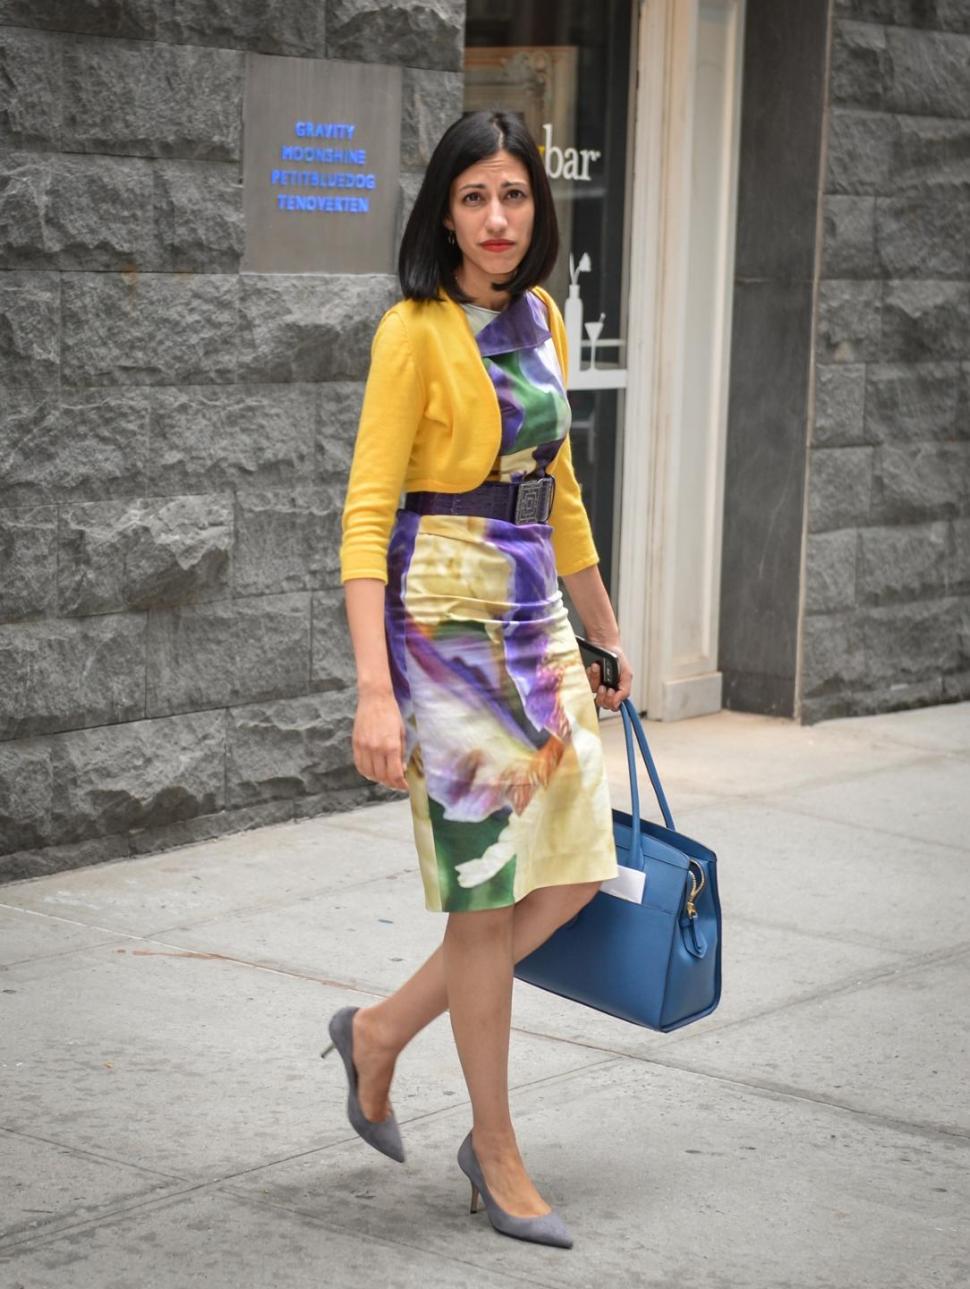 Long-suffering Anthony Weiner wife Huma Abedin got outta dodge for New Year's. Who could blame her? 